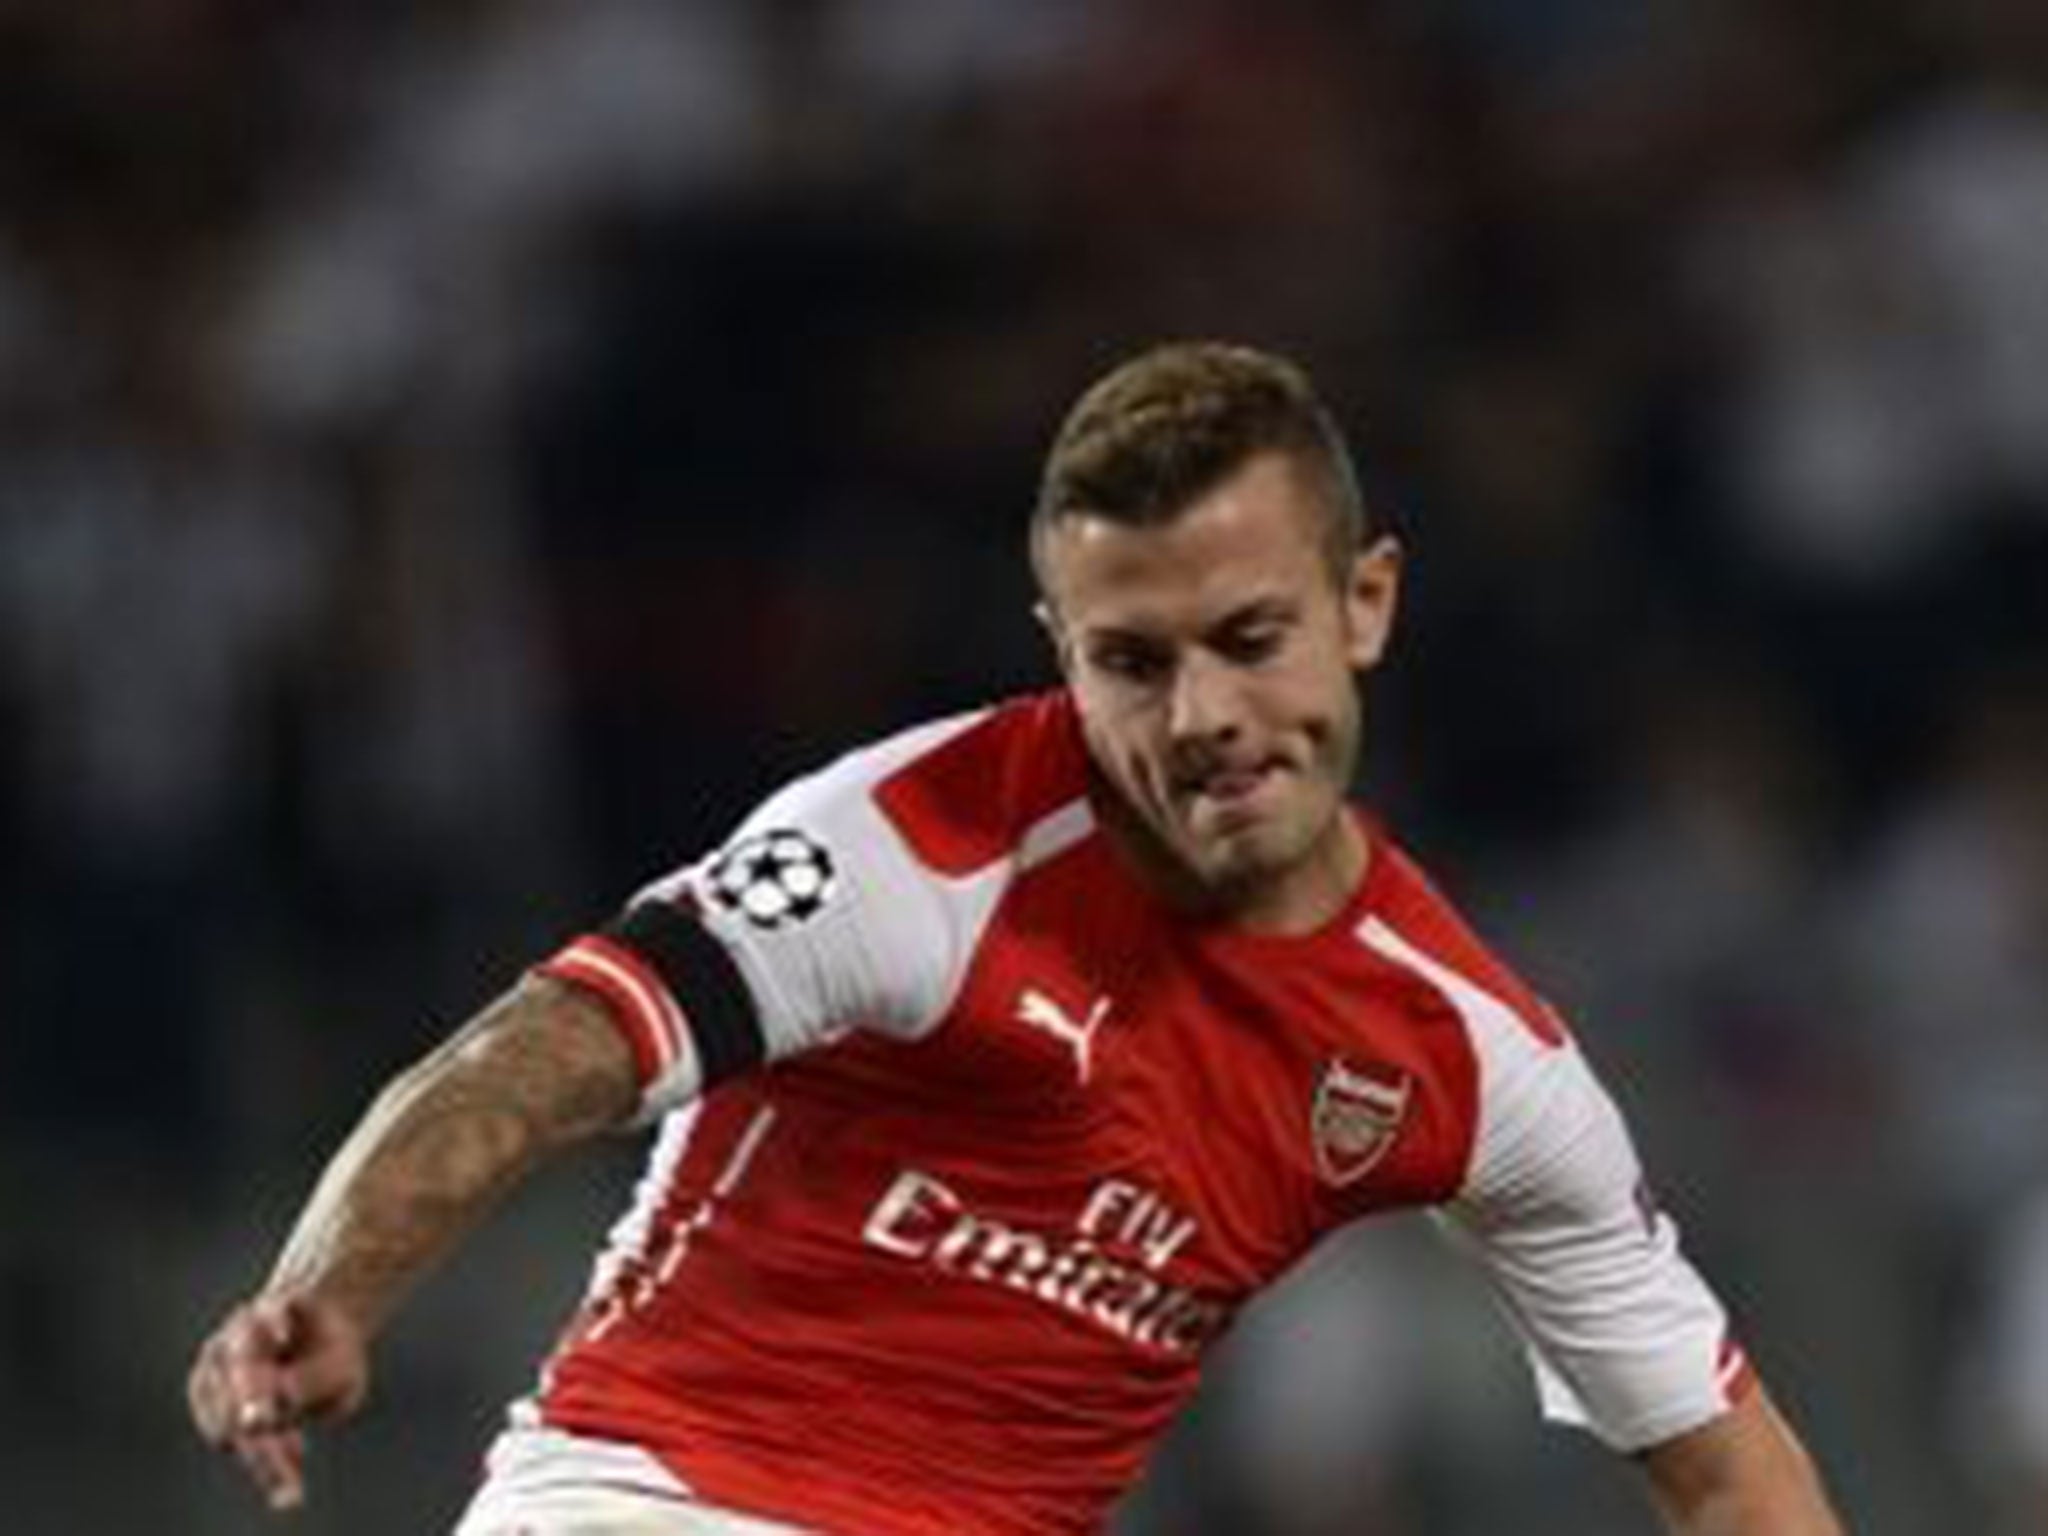 Jack Wilshere has not progressed as expected because of his injuries, insists Wenger